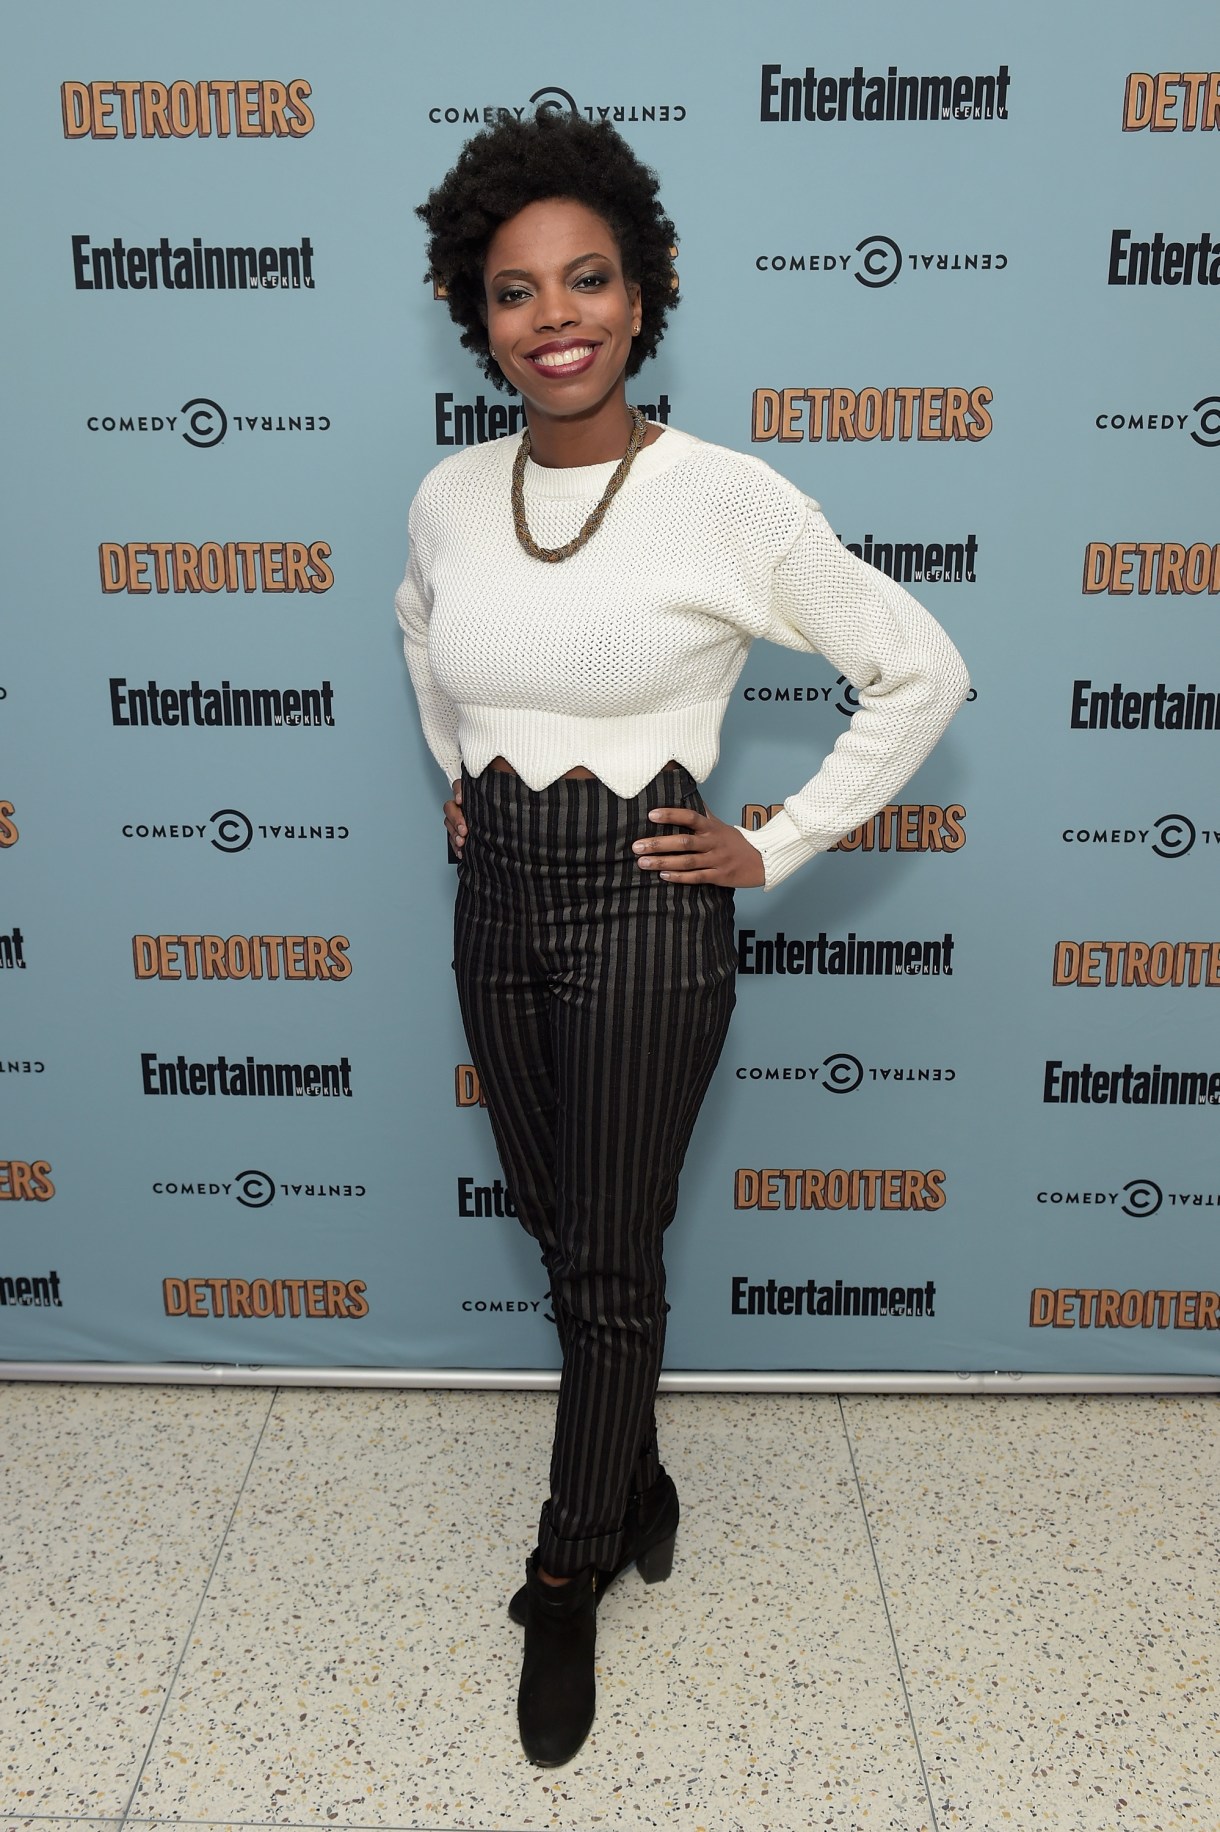 NEW YORK, NY - FEBRUARY 27:  SNL cast member Sasheer Zamata attends an exclusive Screening Of "Detroiters," starring Sam Richardson and Tim Robinson, hosted by Comedy Central & Entertainment Weekly at Time Inc. Studios on February 27, 2017 in New York City.